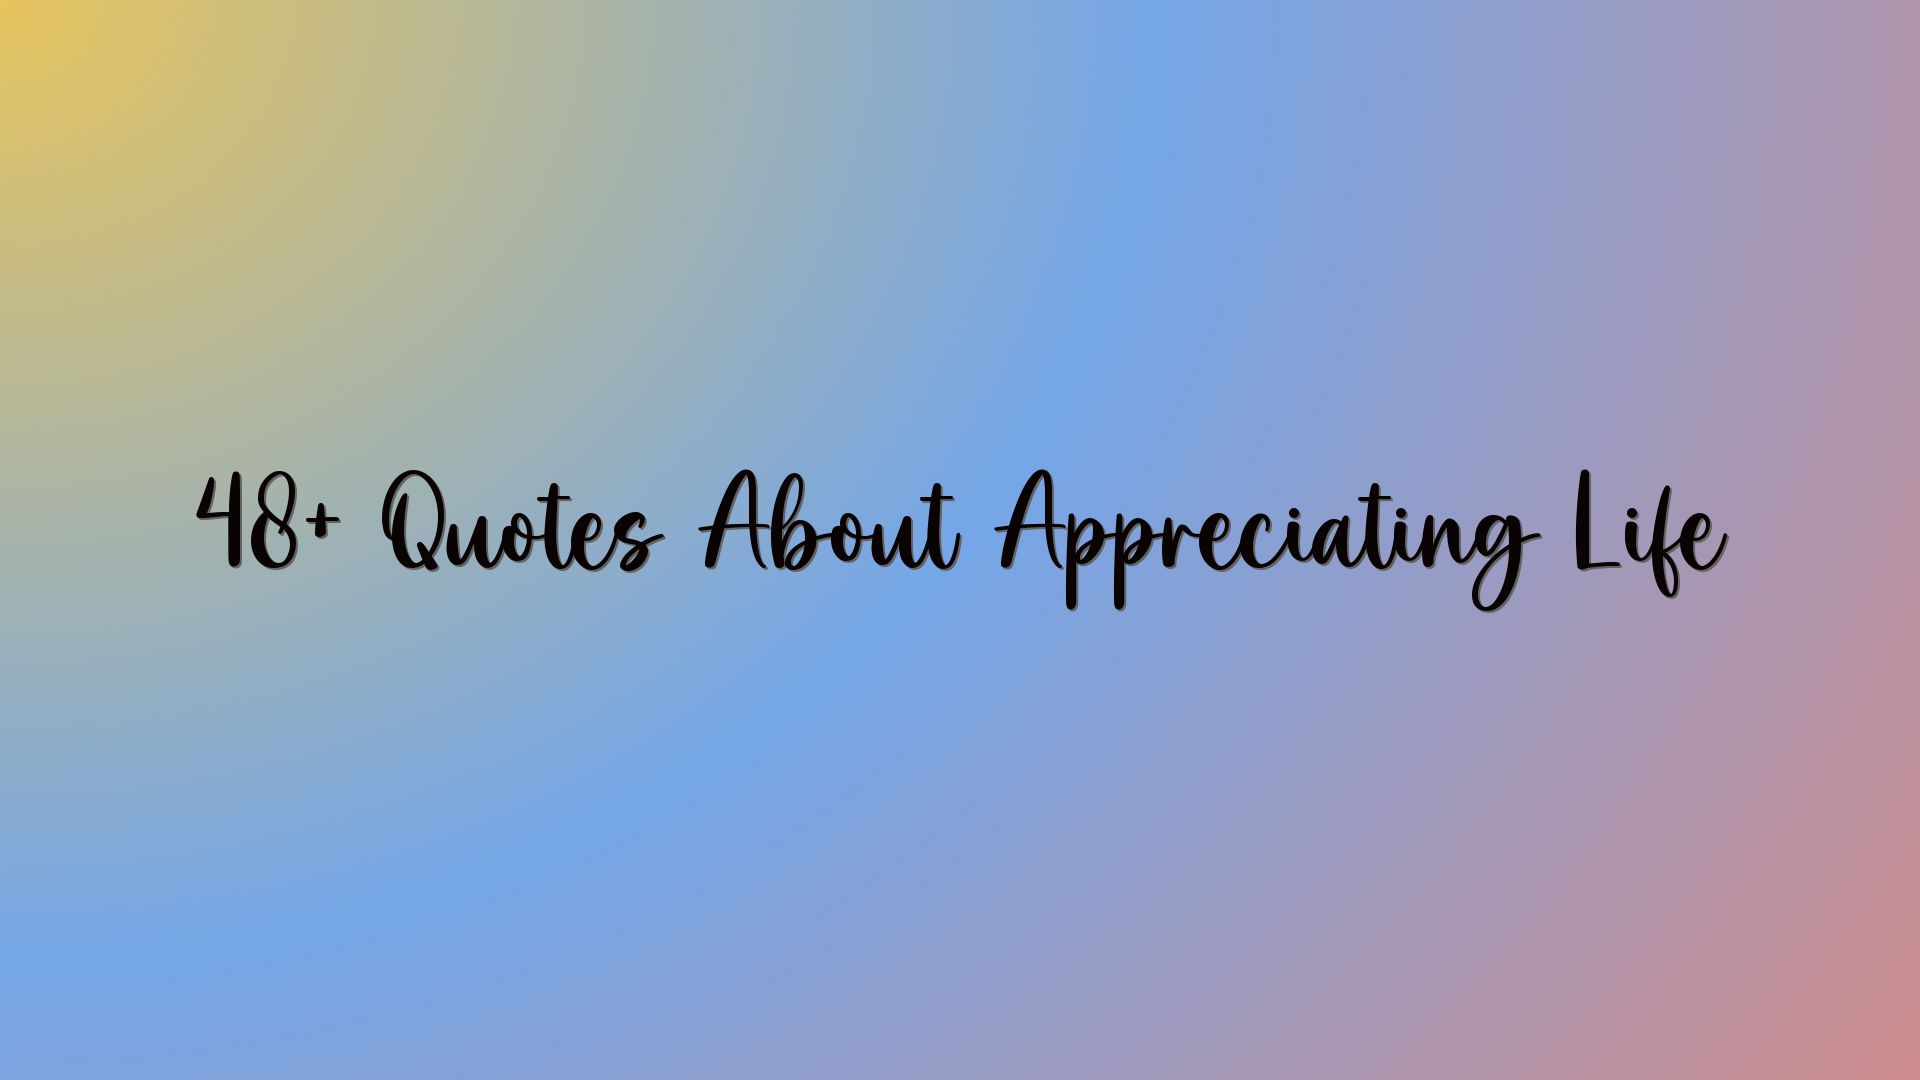 48+ Quotes About Appreciating Life